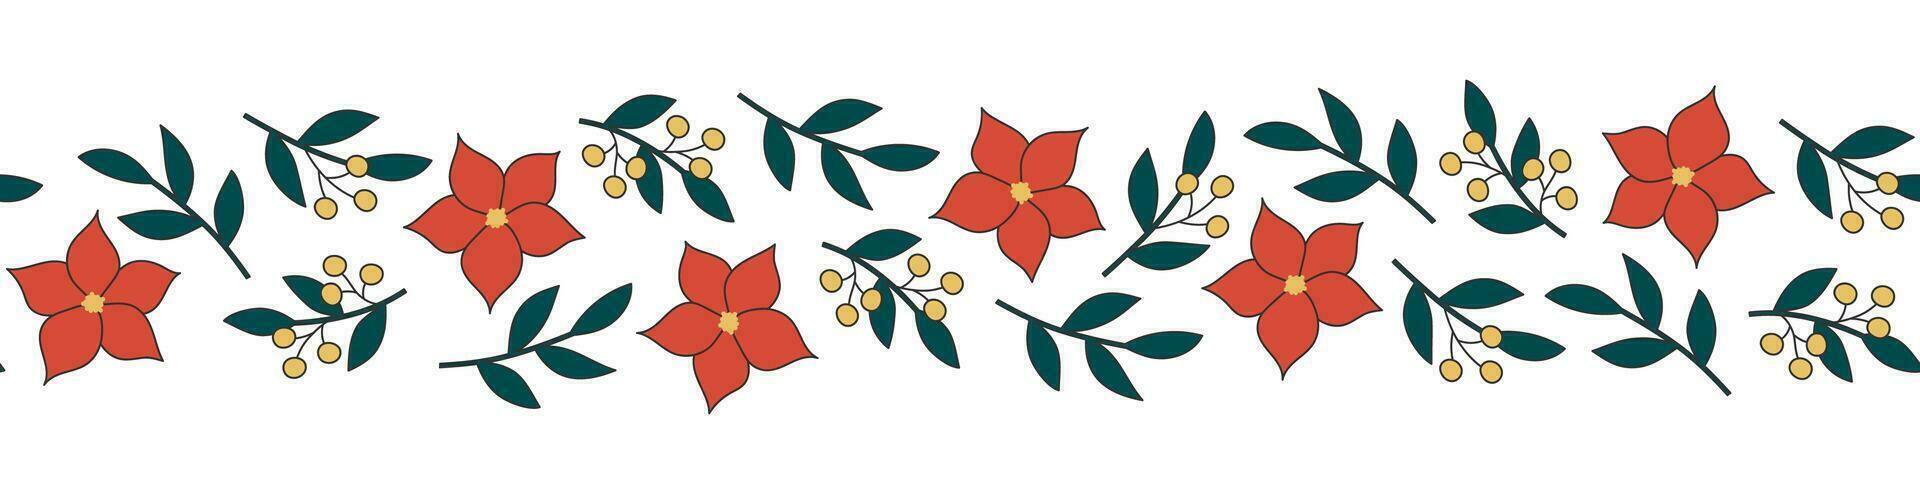 Seamless border with poinsettia flowers and blue branches on white background. Good for fabric, wallpaper, packaging, textile, web design. vector